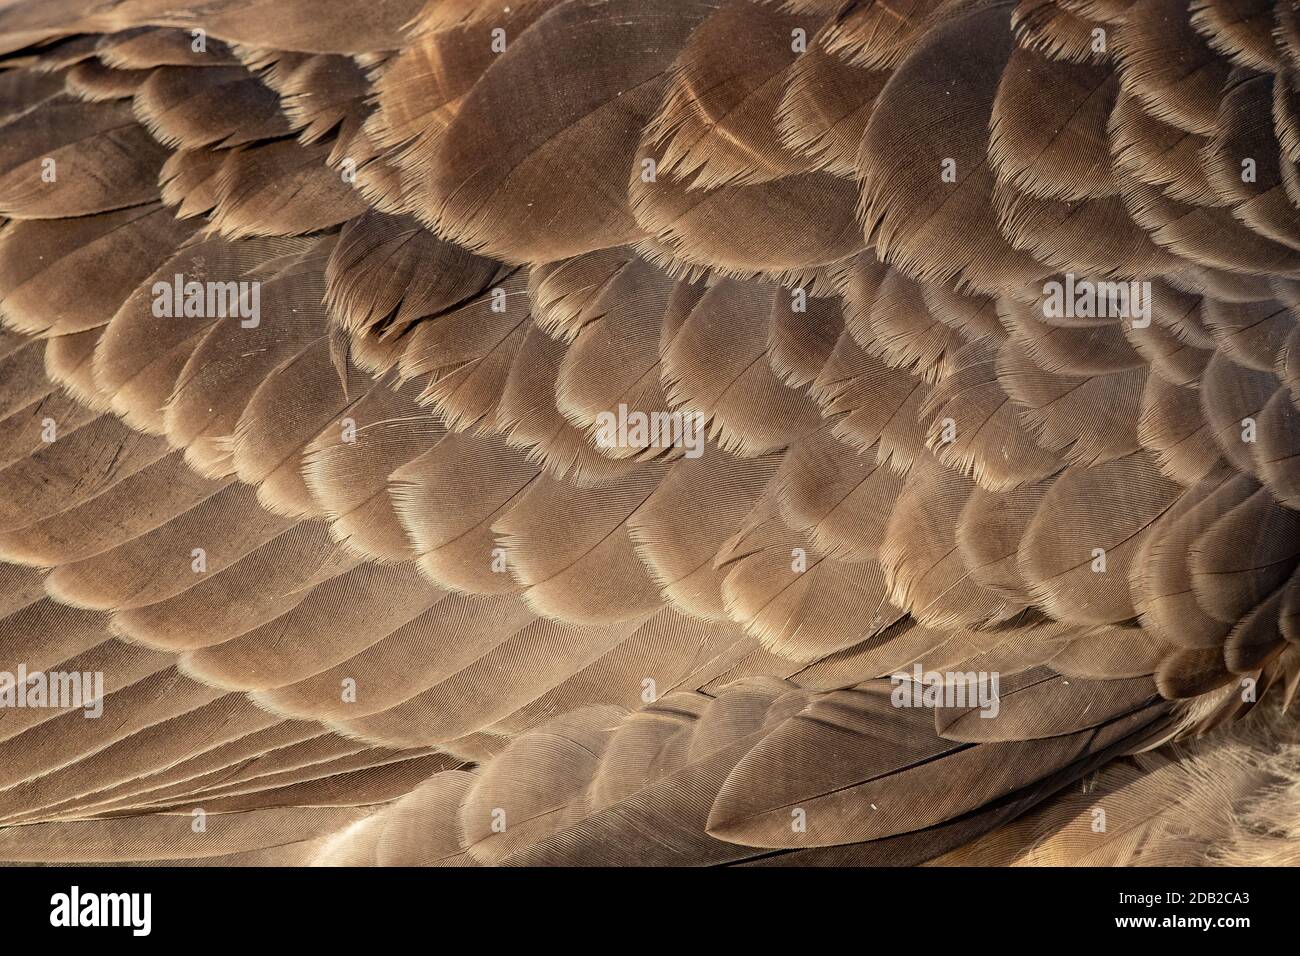 Canada Goose Feather High Resolution Stock Photography and Images - Alamy